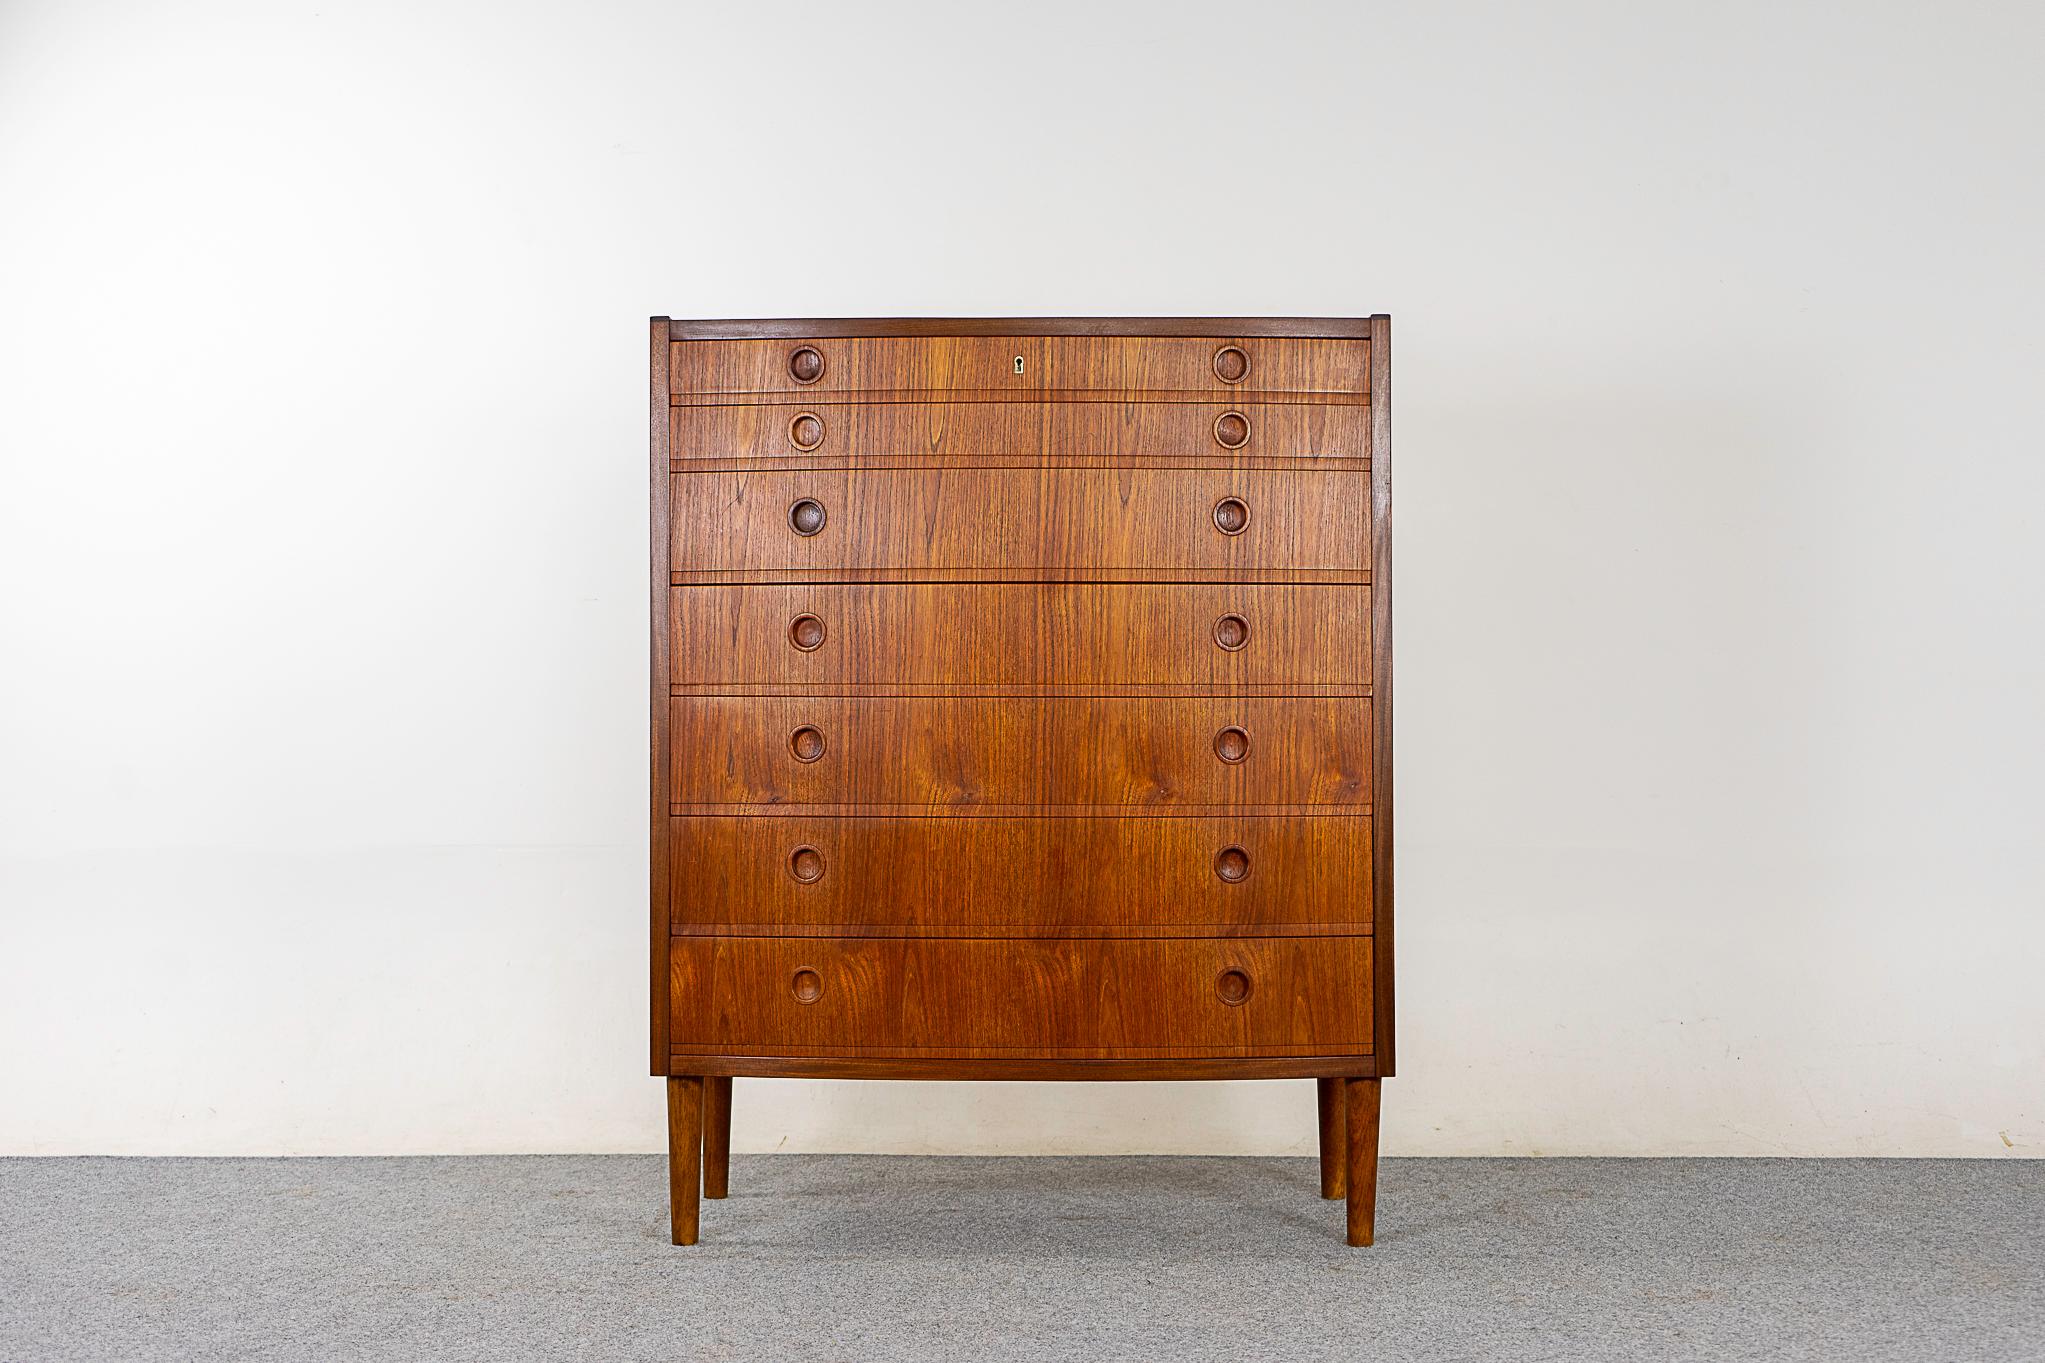 Teak midcentury highboy dresser, circa 1960s. Graduated drawer design with darling sleek, slim top drawers with fun finger pulls. Elegant bow Front Design, a nice touch for your bedroom. Beautiful patina!

Please inquire for international shipping